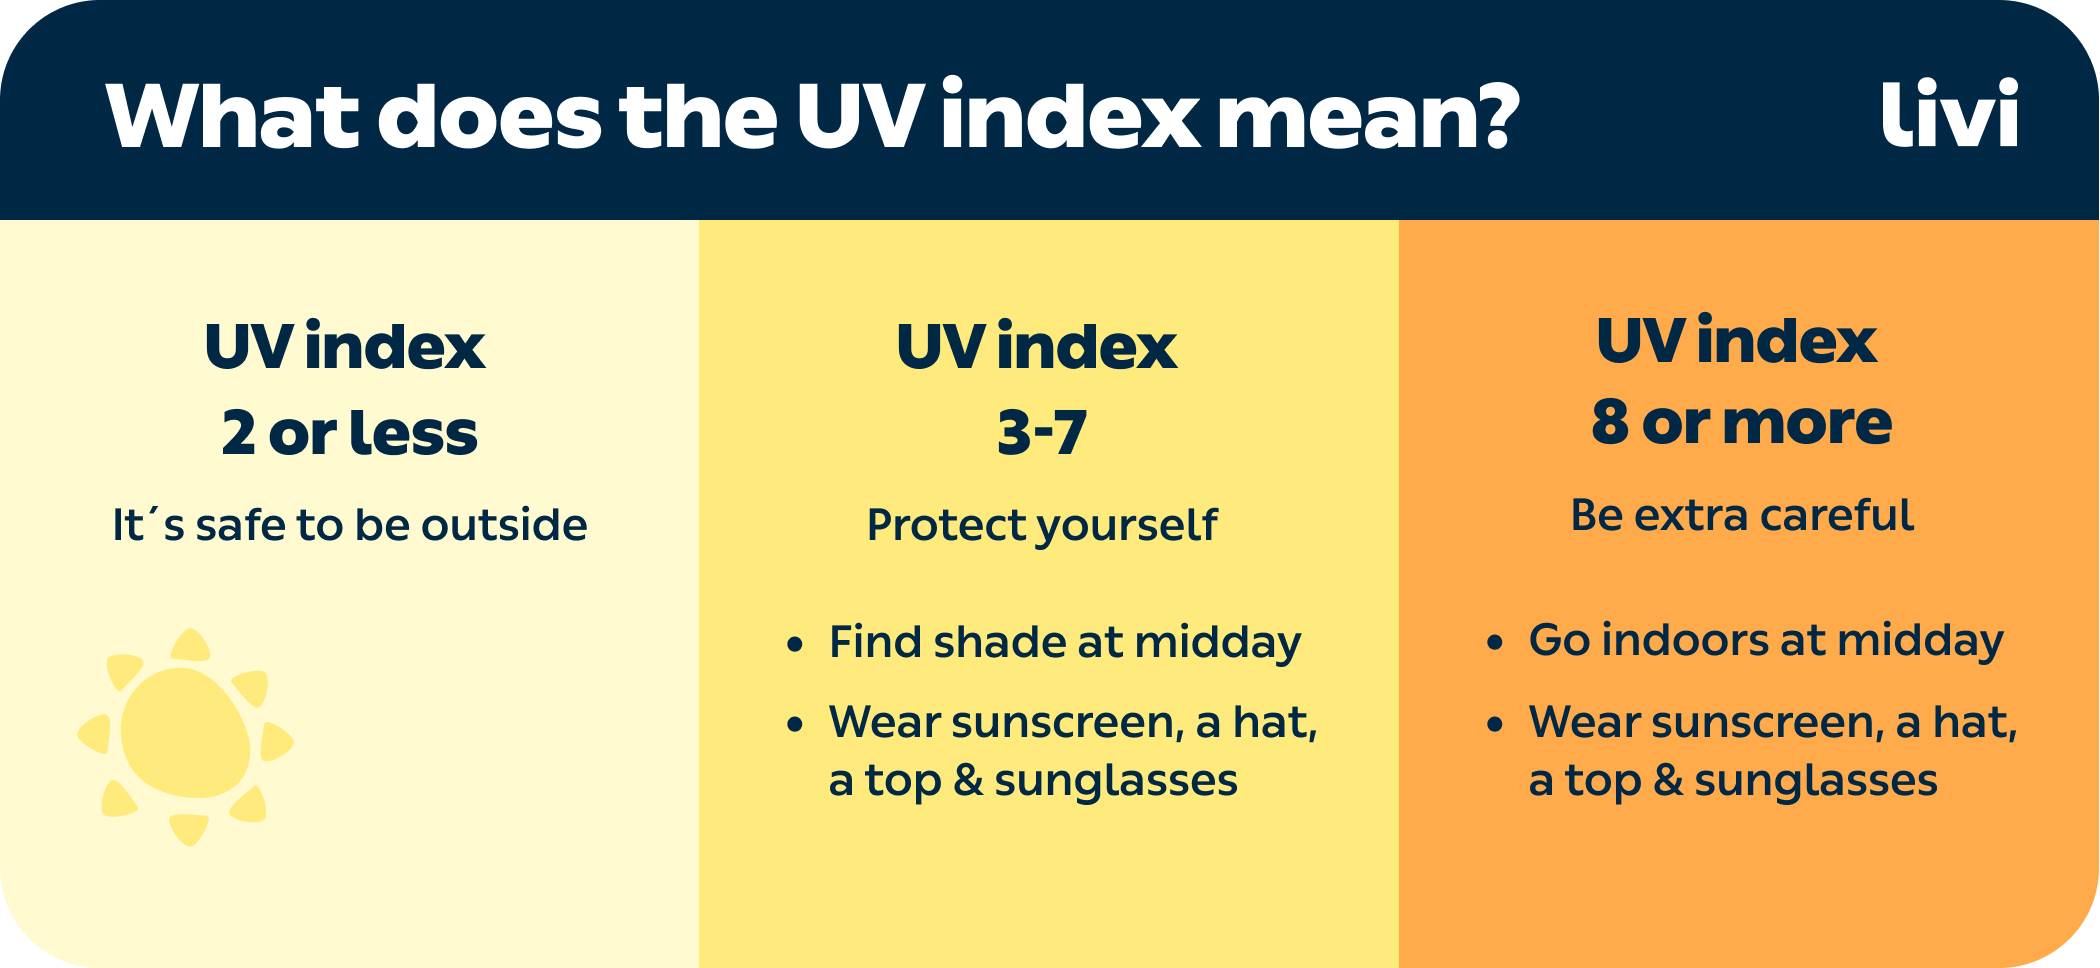 What does the UV index mean?